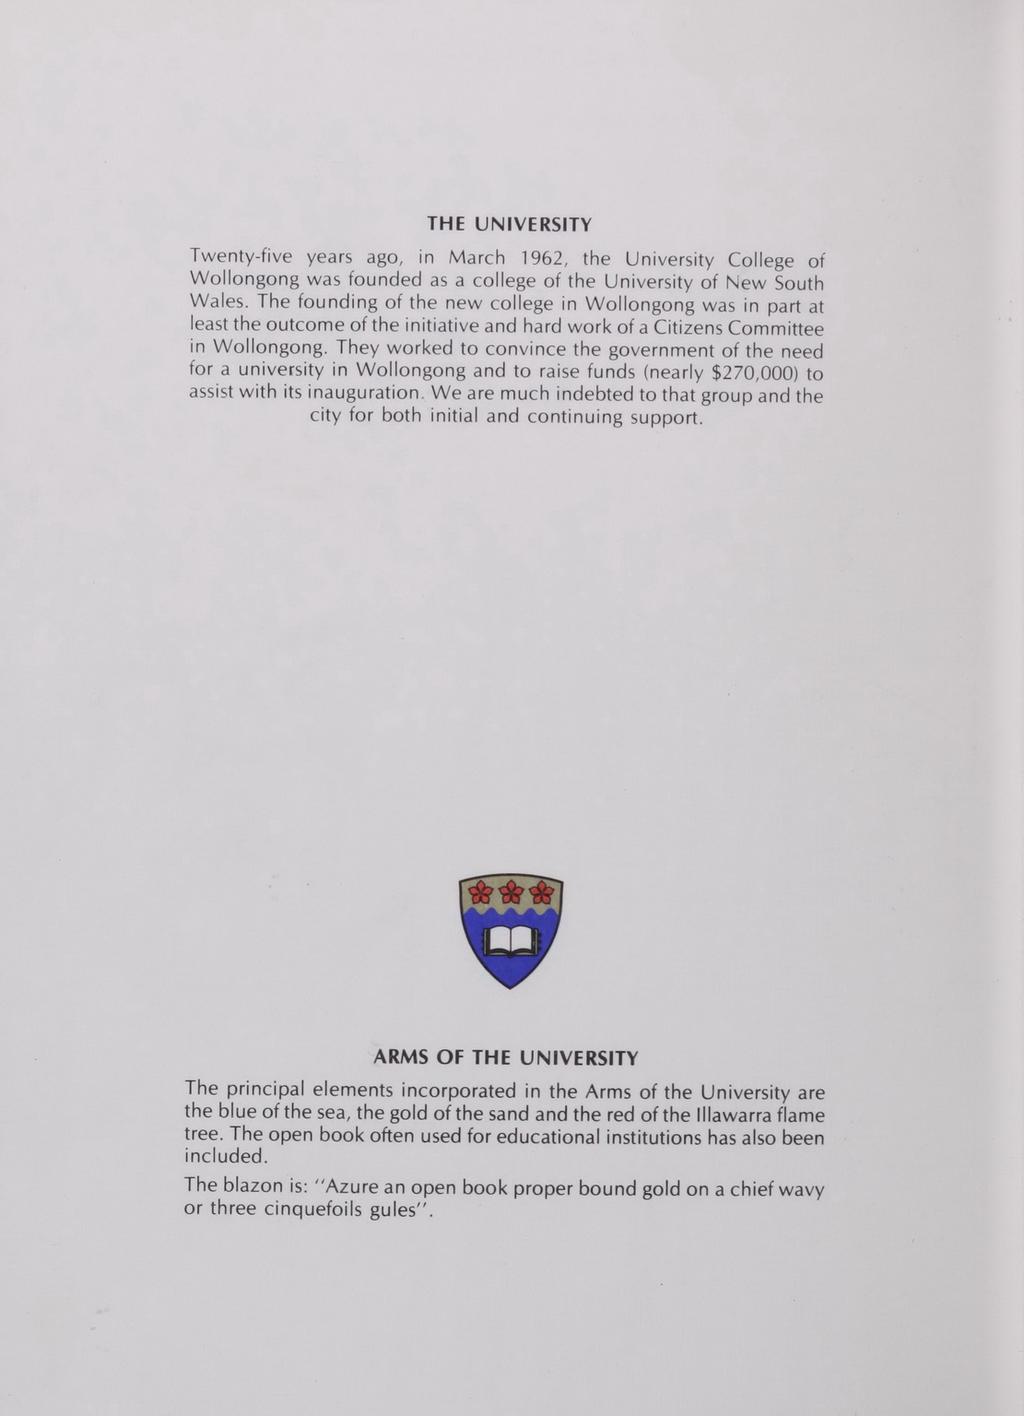 THE UN IVERSITY Twenty-five years ago, in March 1962, the University College oi Wollongong was founded as a college of the UniverSity of f'\.ew South Wales.